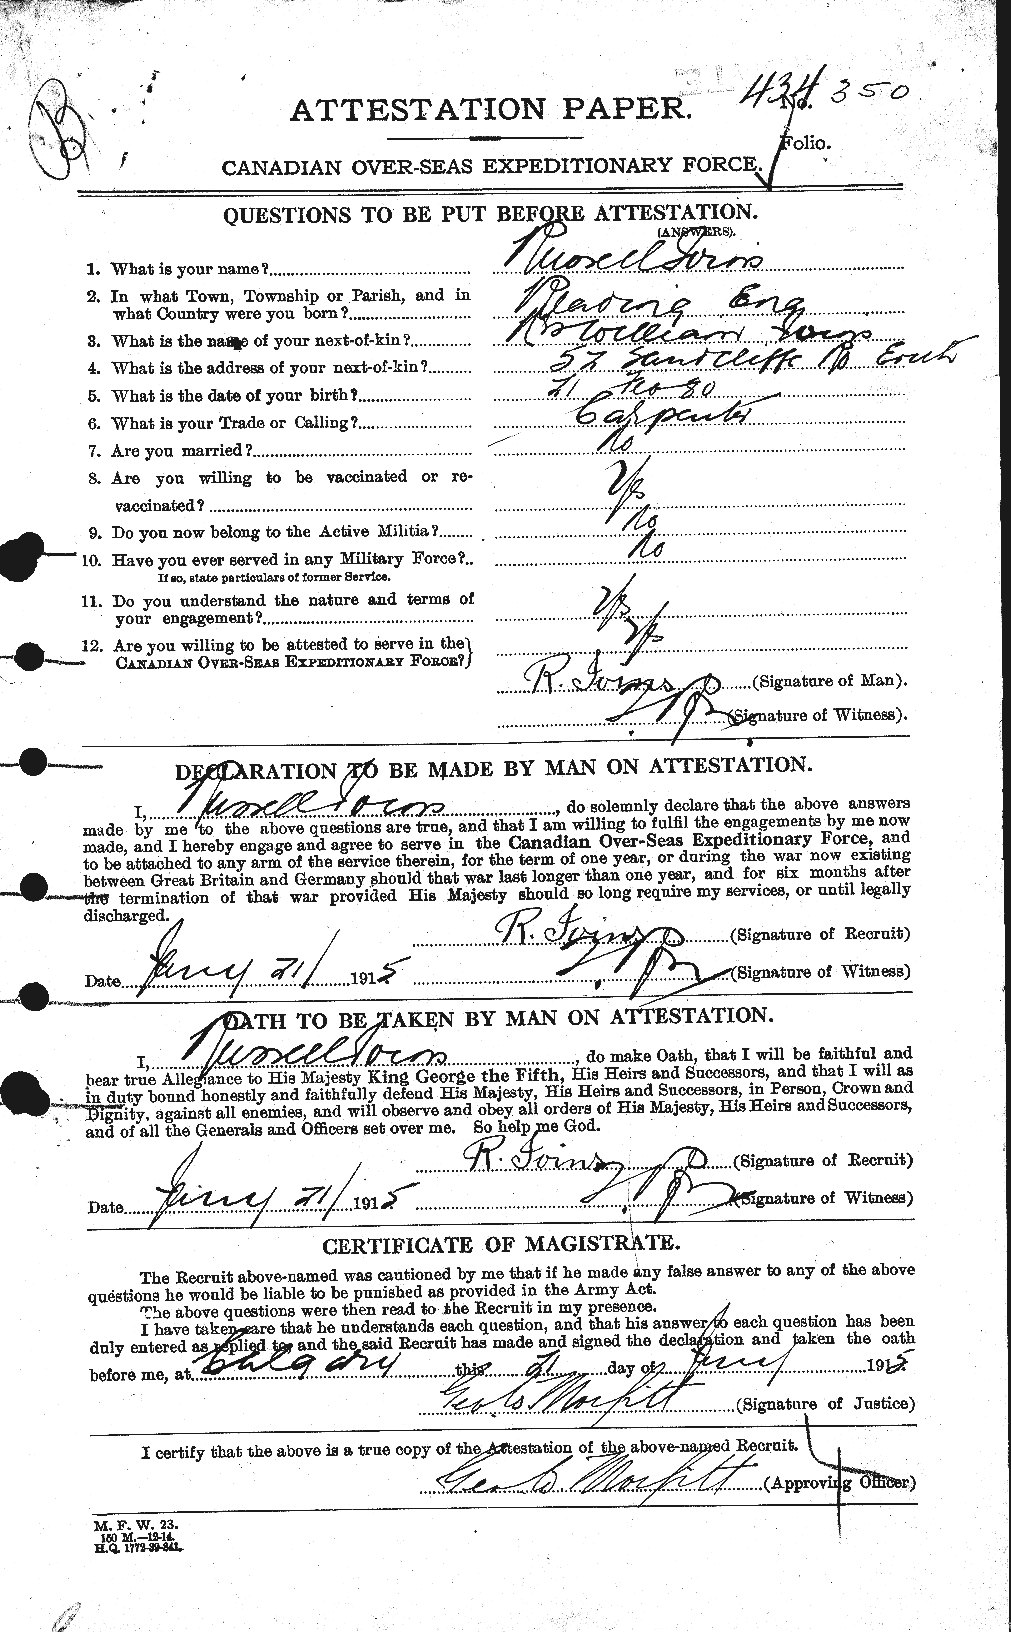 Personnel Records of the First World War - CEF 415156a